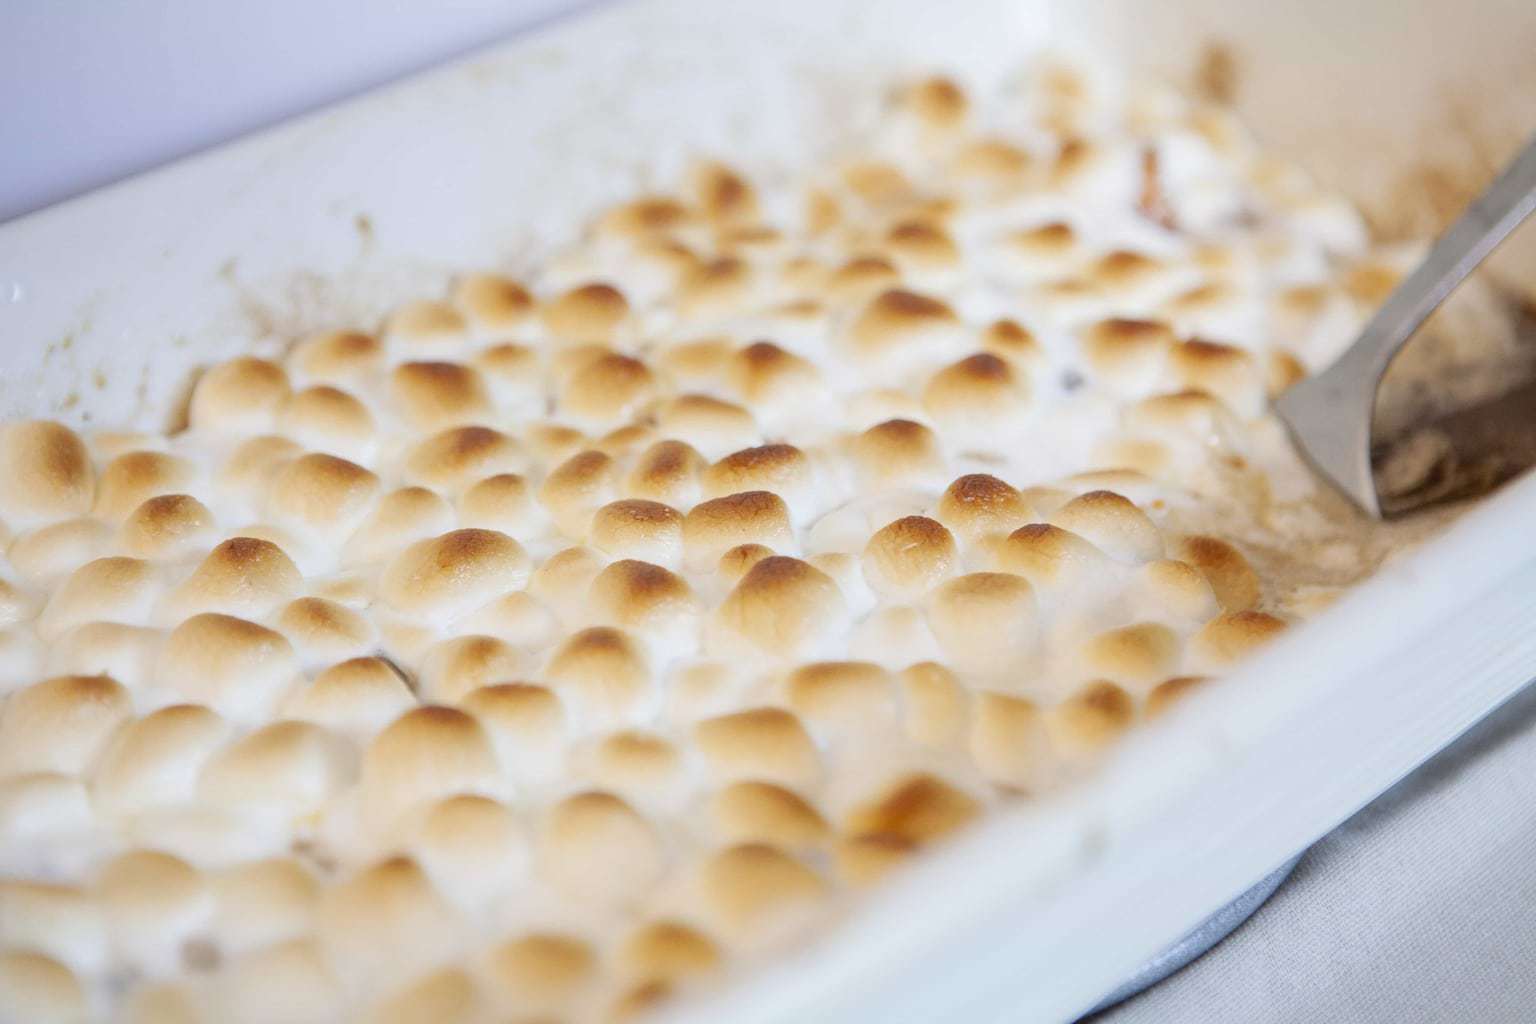 Candied Yam and Marshmallows